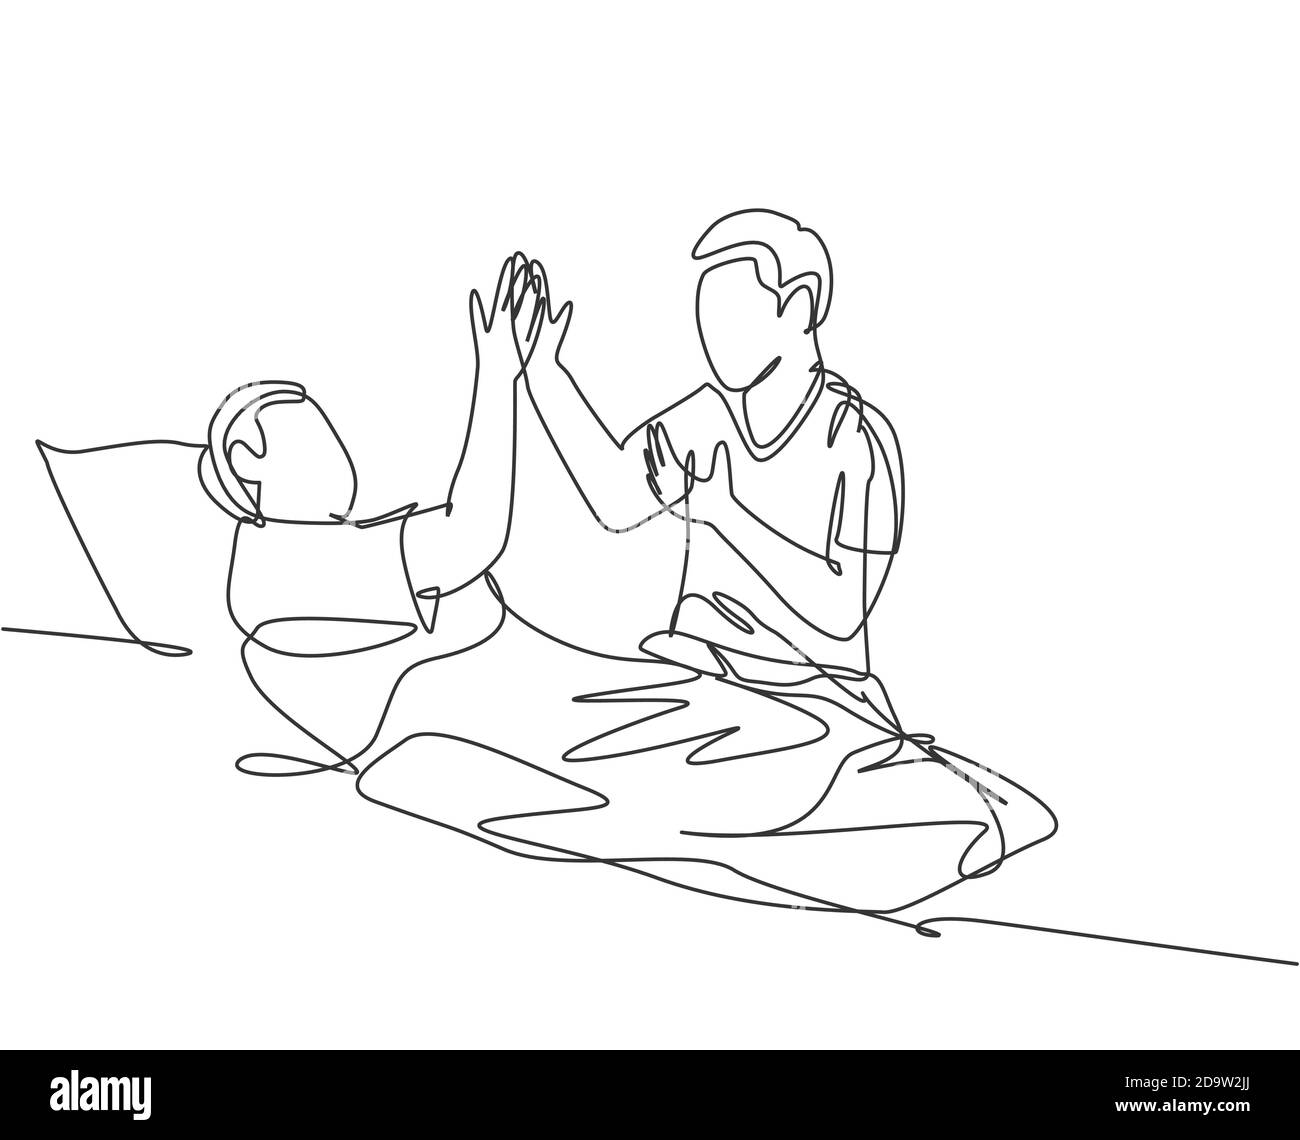 Continuous Line Drawing of a Family Stock Illustration  Illustration of  abstract care 143253848